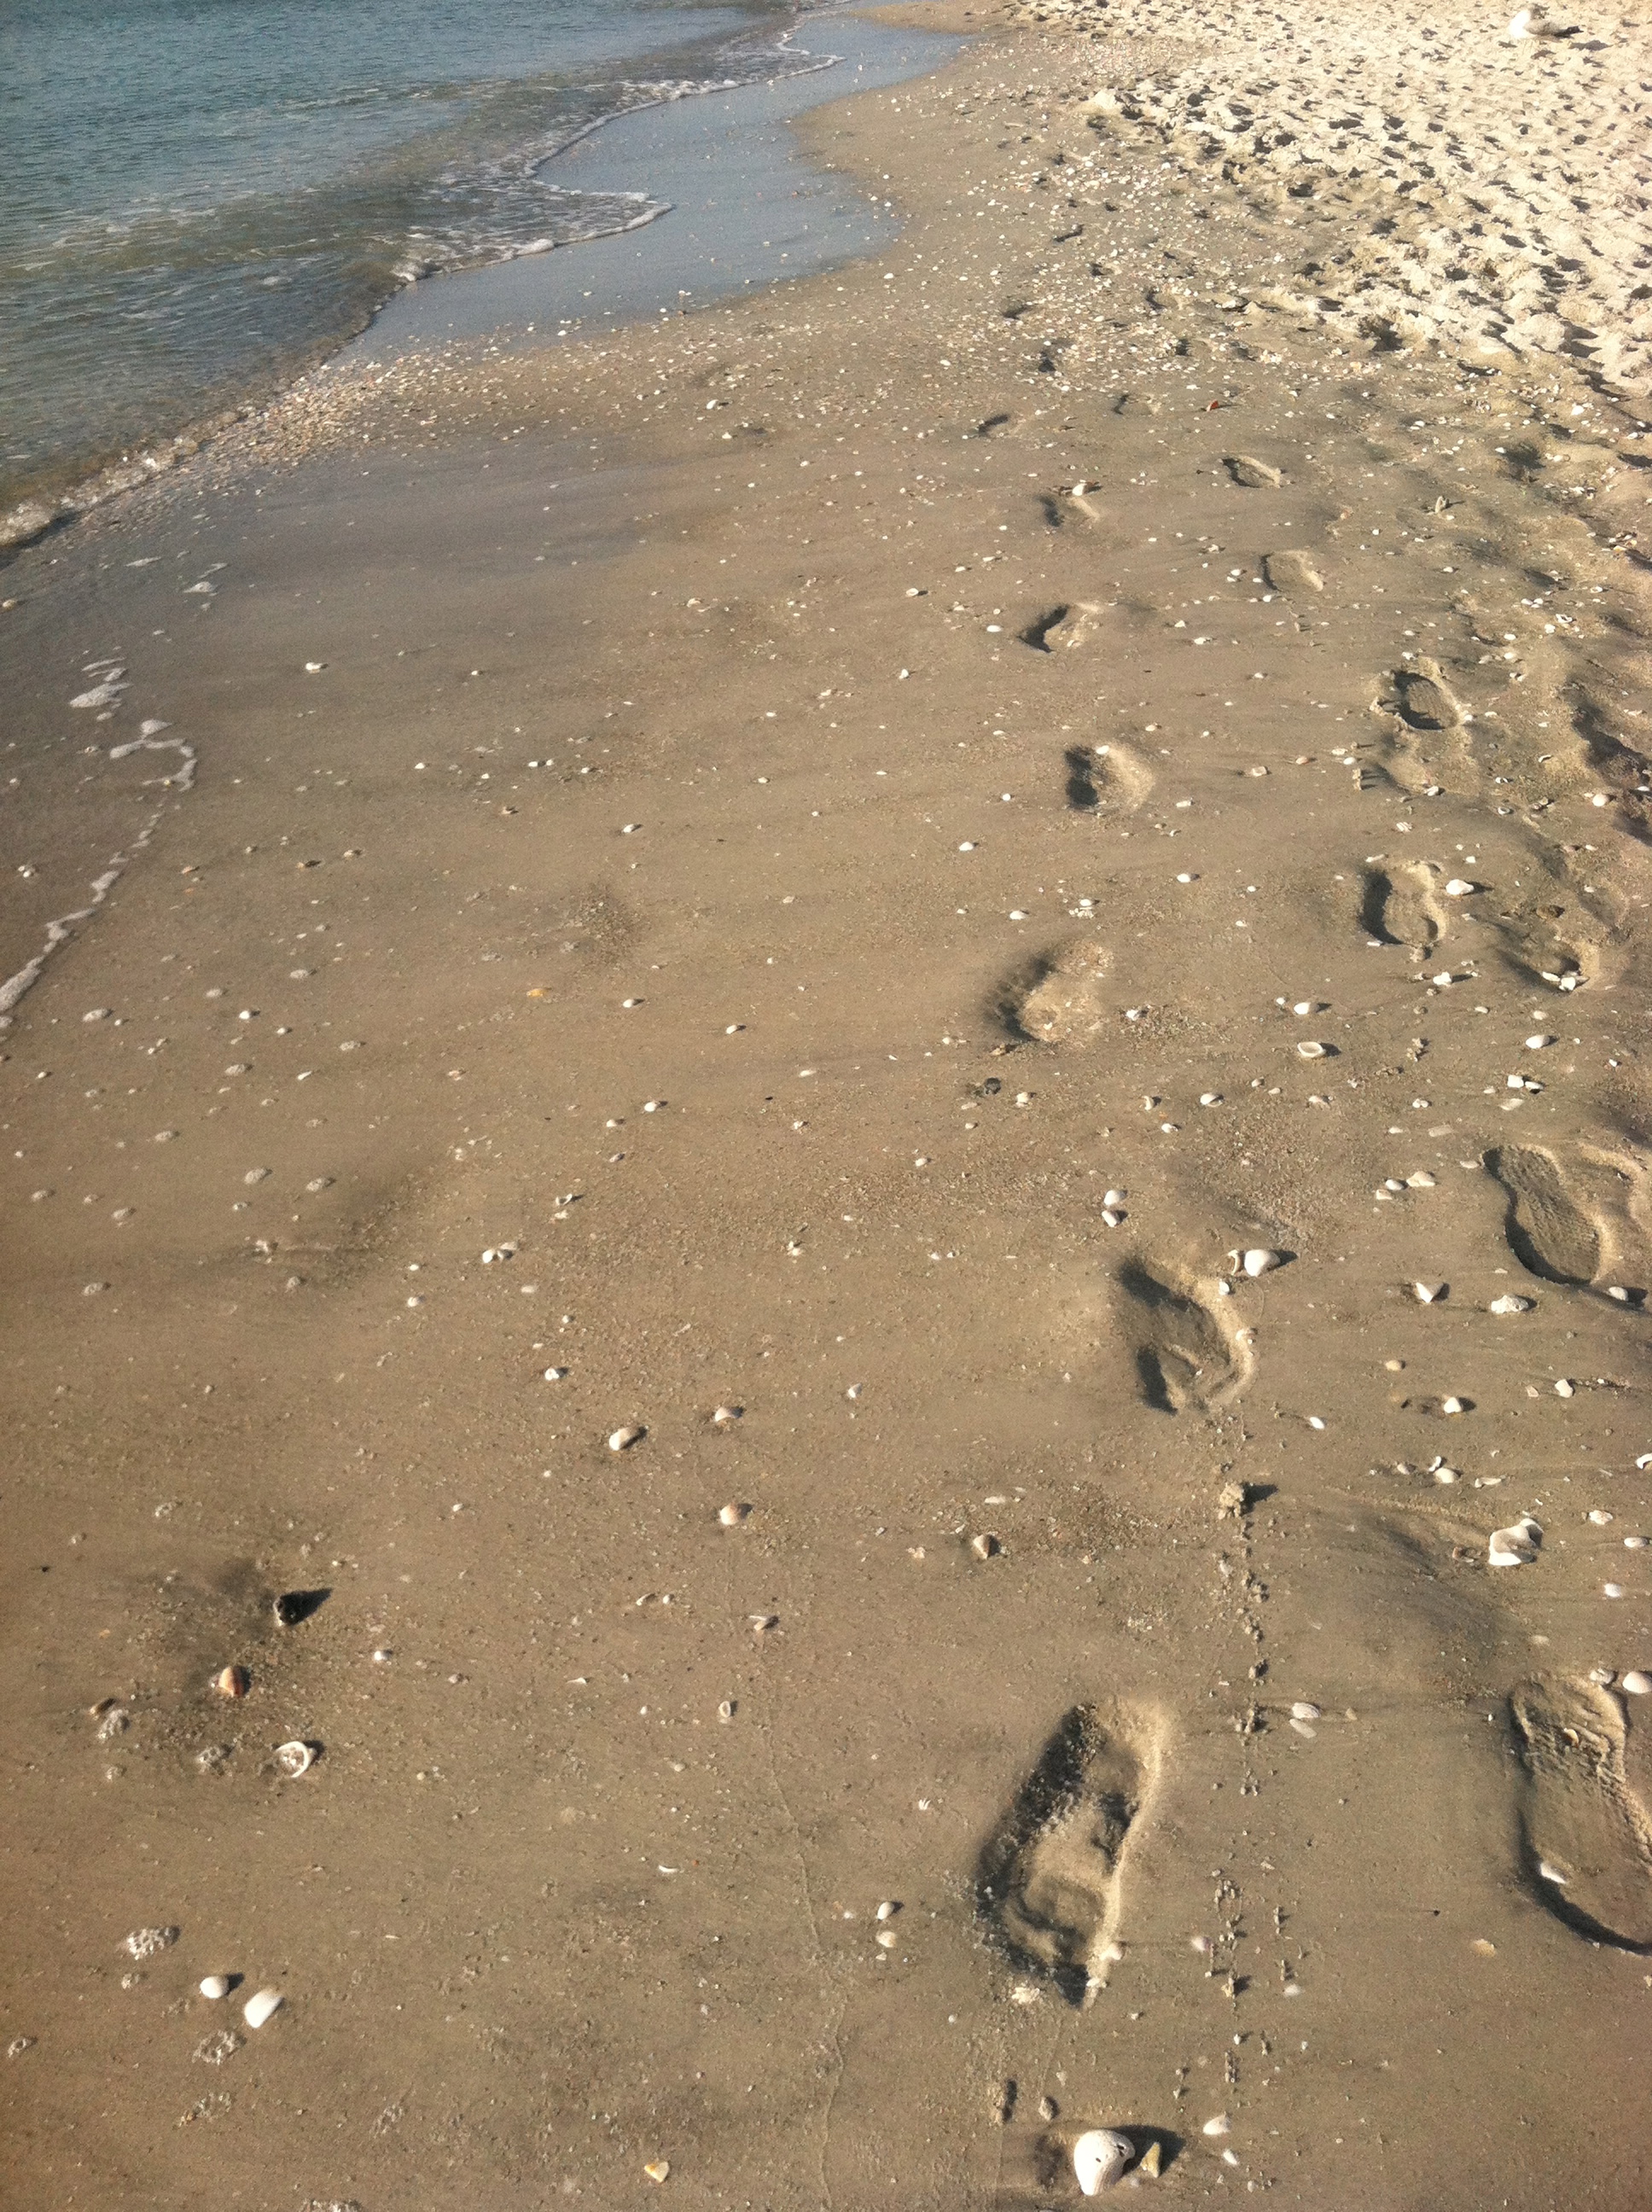 Footprints in the Sand - I Can Teach My Child!